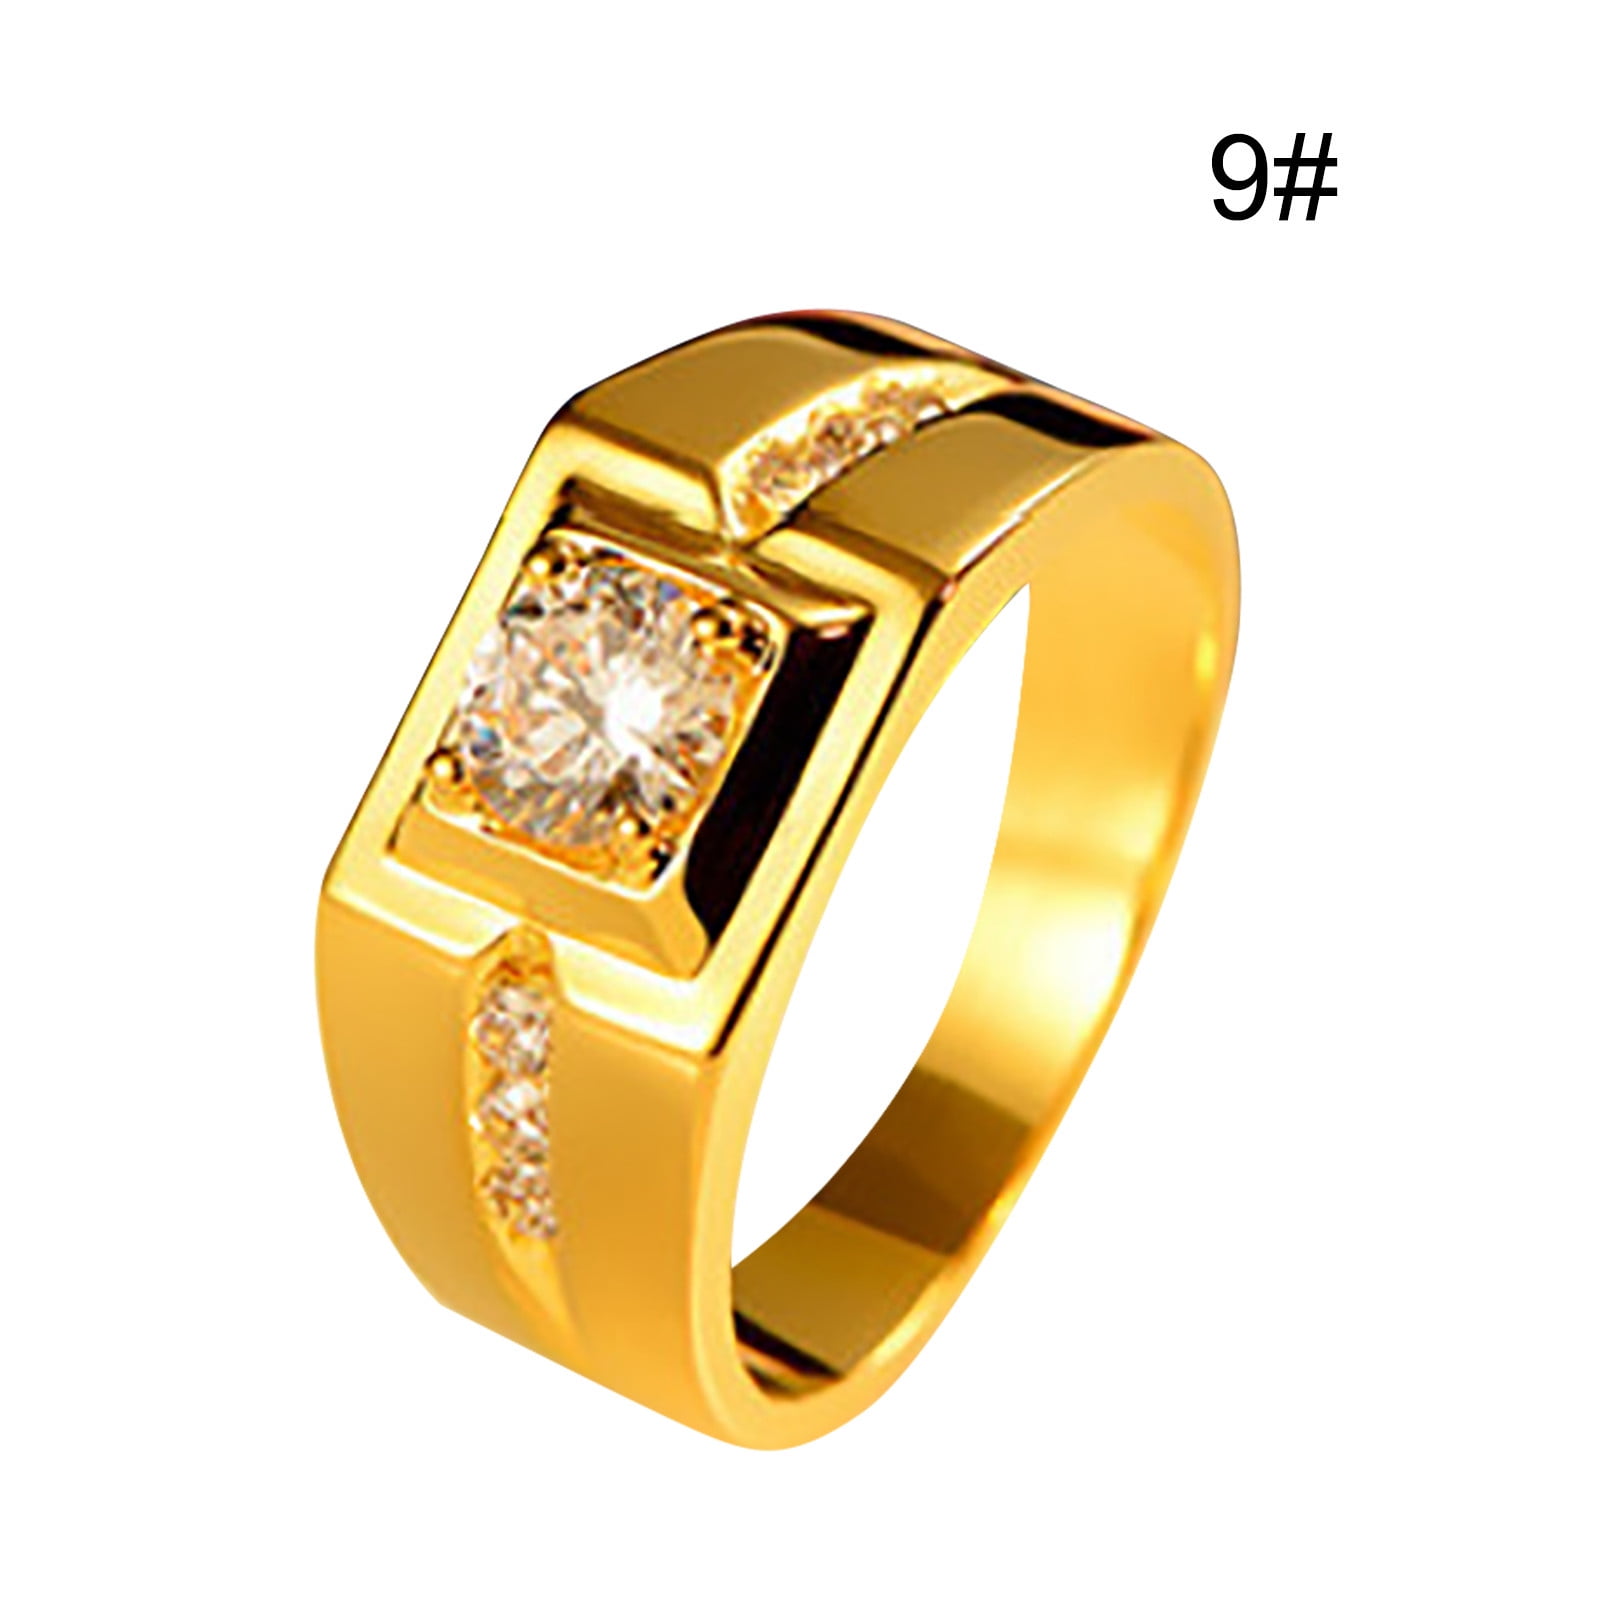 Ladies Gold Rings at Best Price from Manufacturers, Suppliers & Dealers